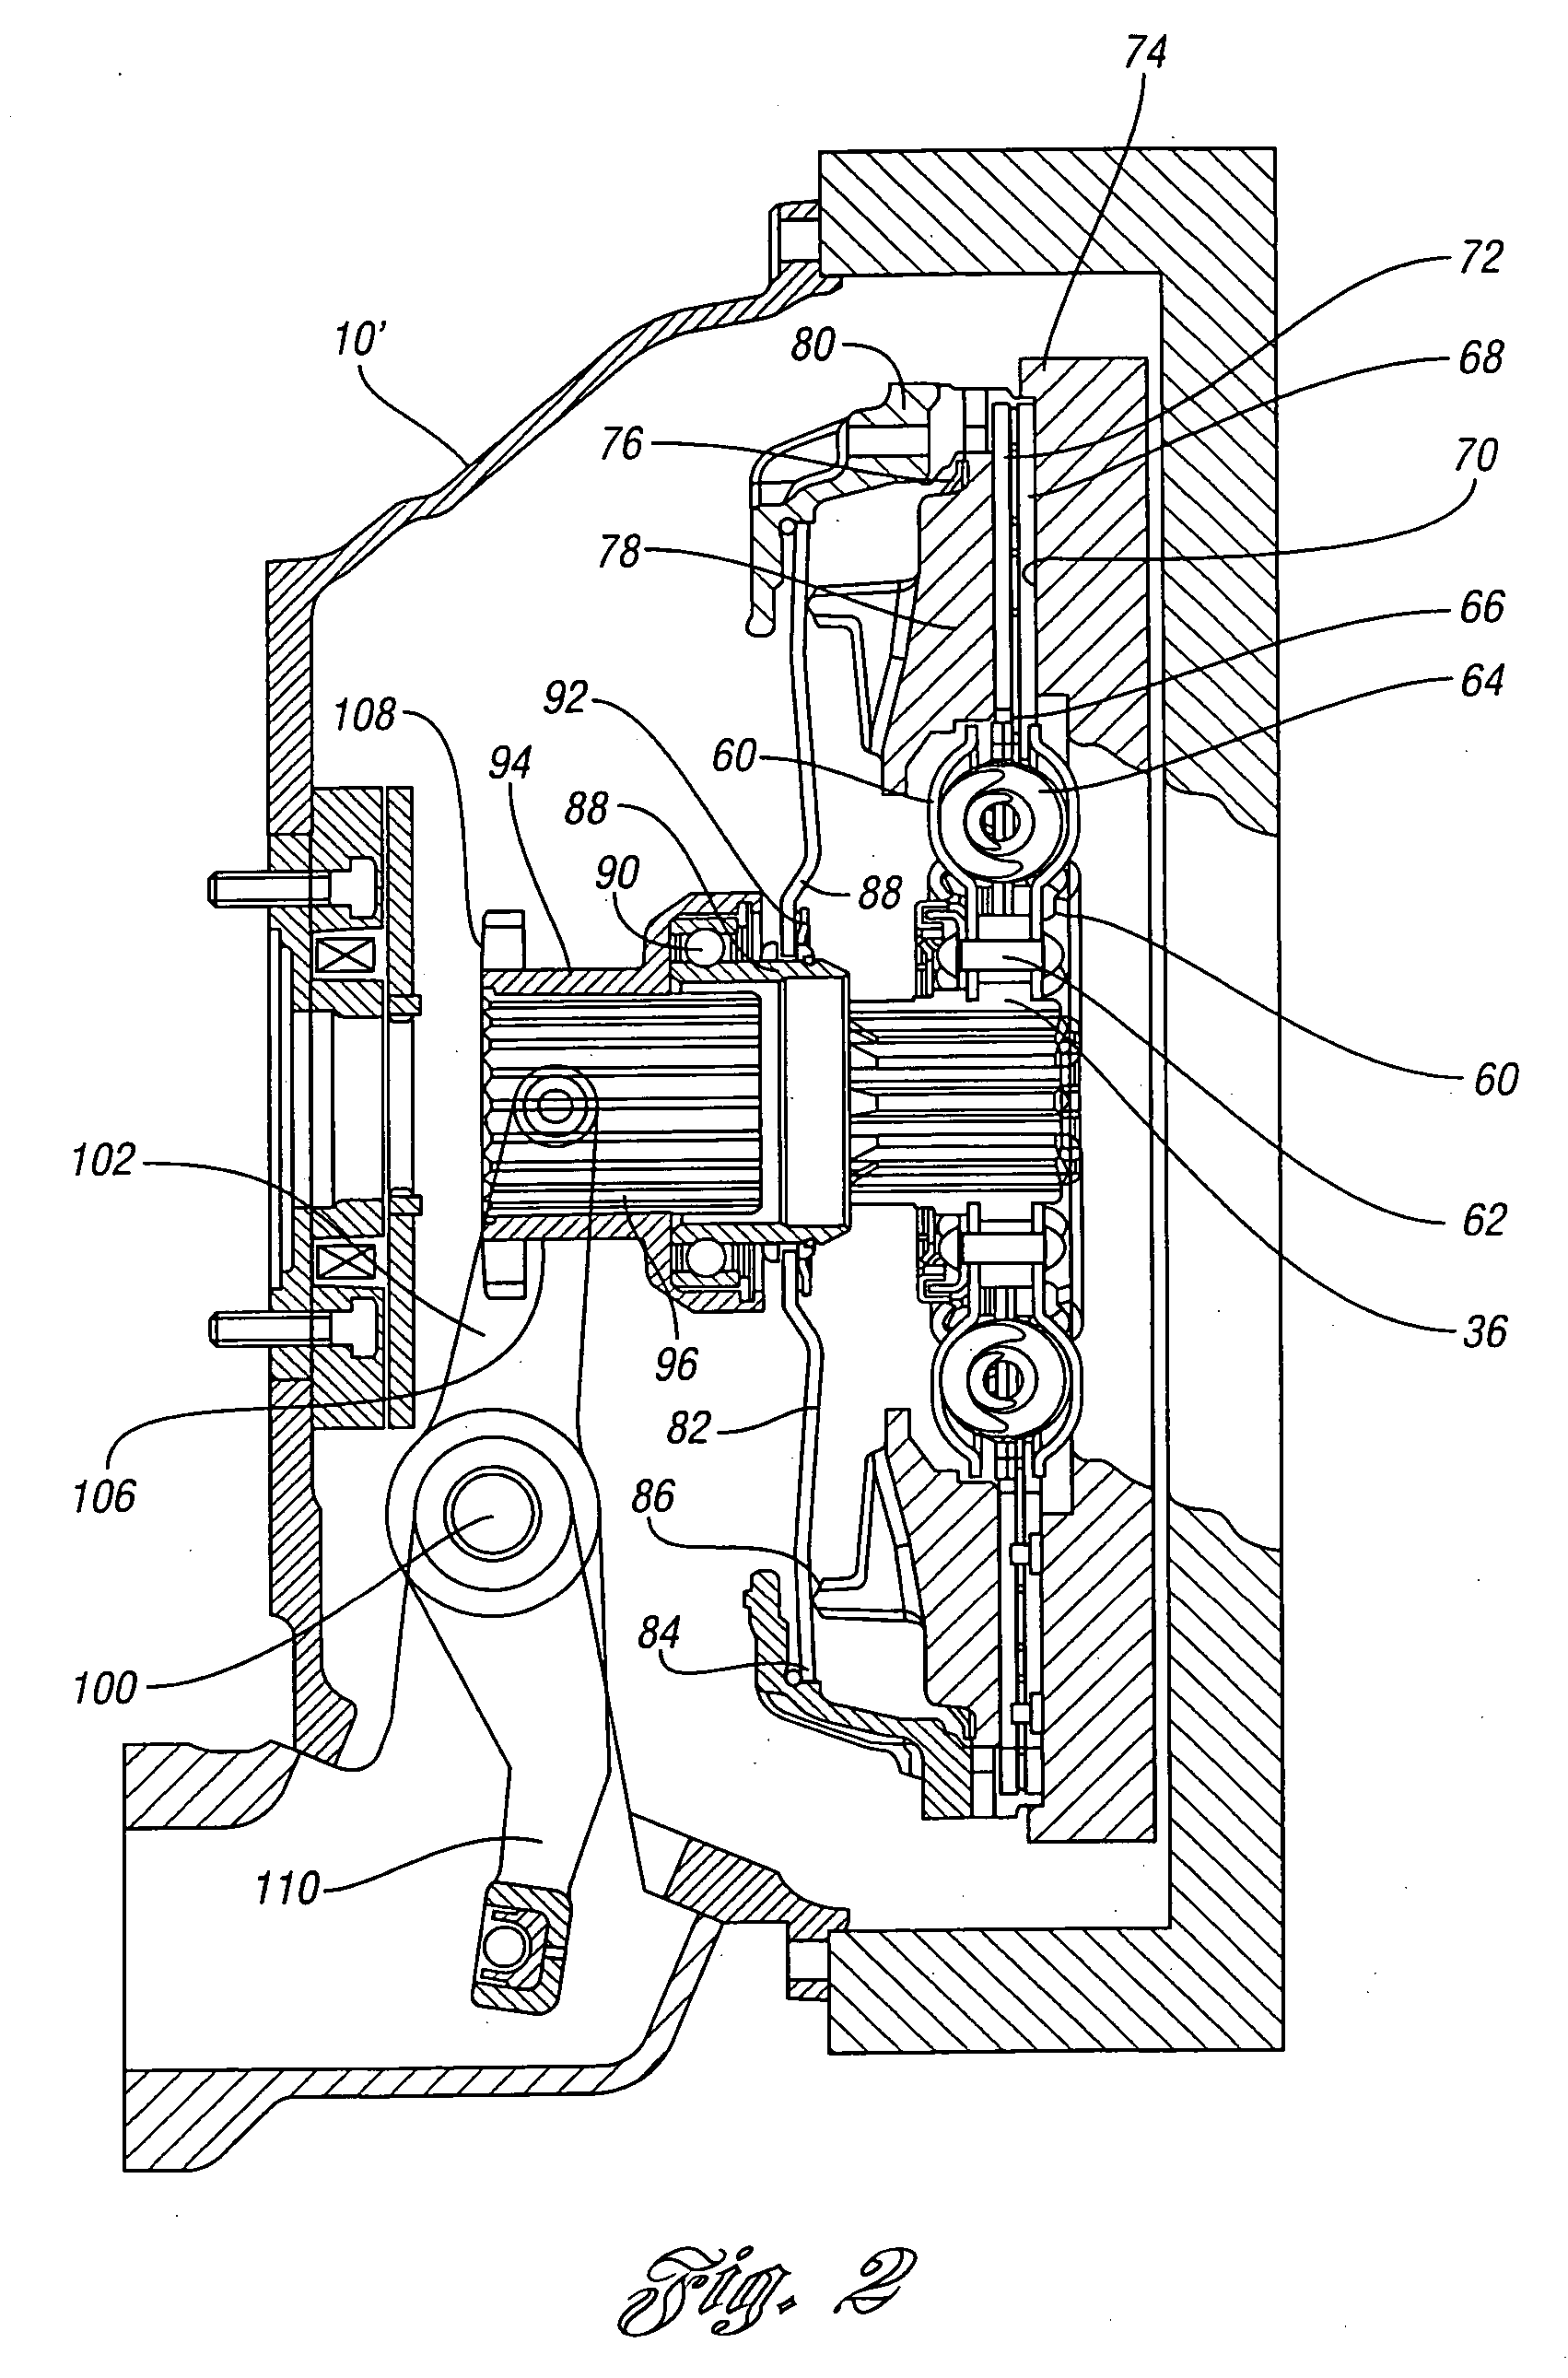 Electromagnetic brake for a multiple-ratio power transmission in a vehicle powertrain